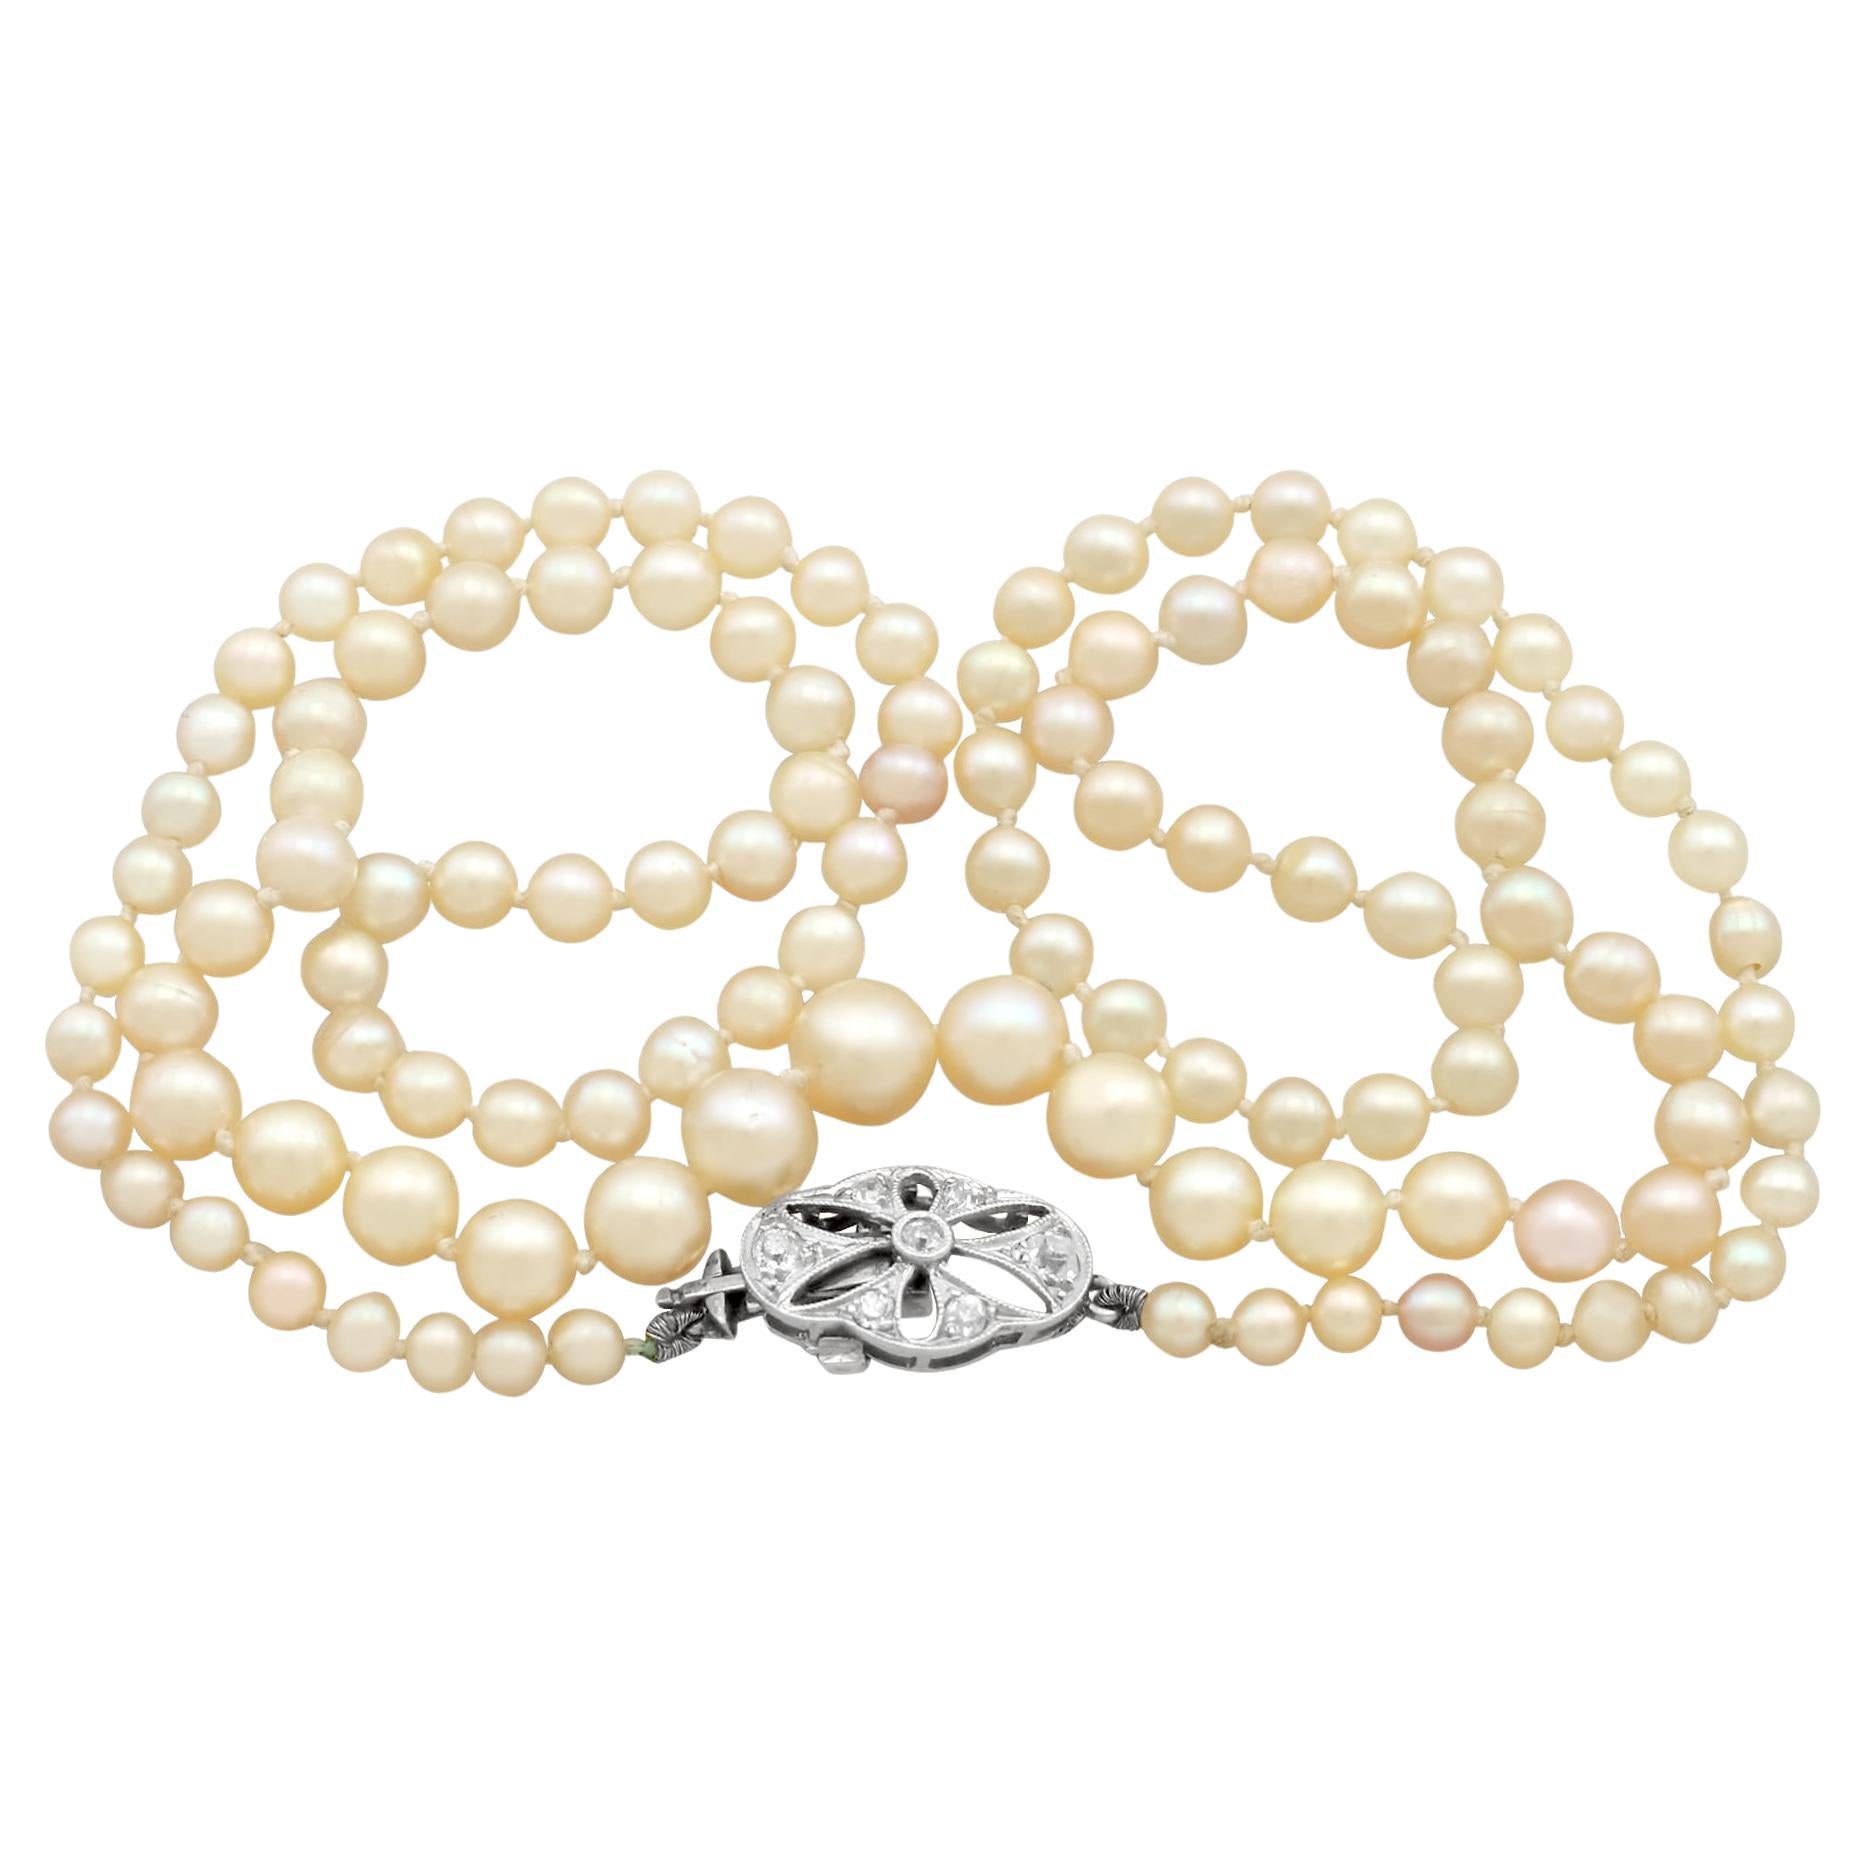 How do I put a clasp on a pearl necklace?